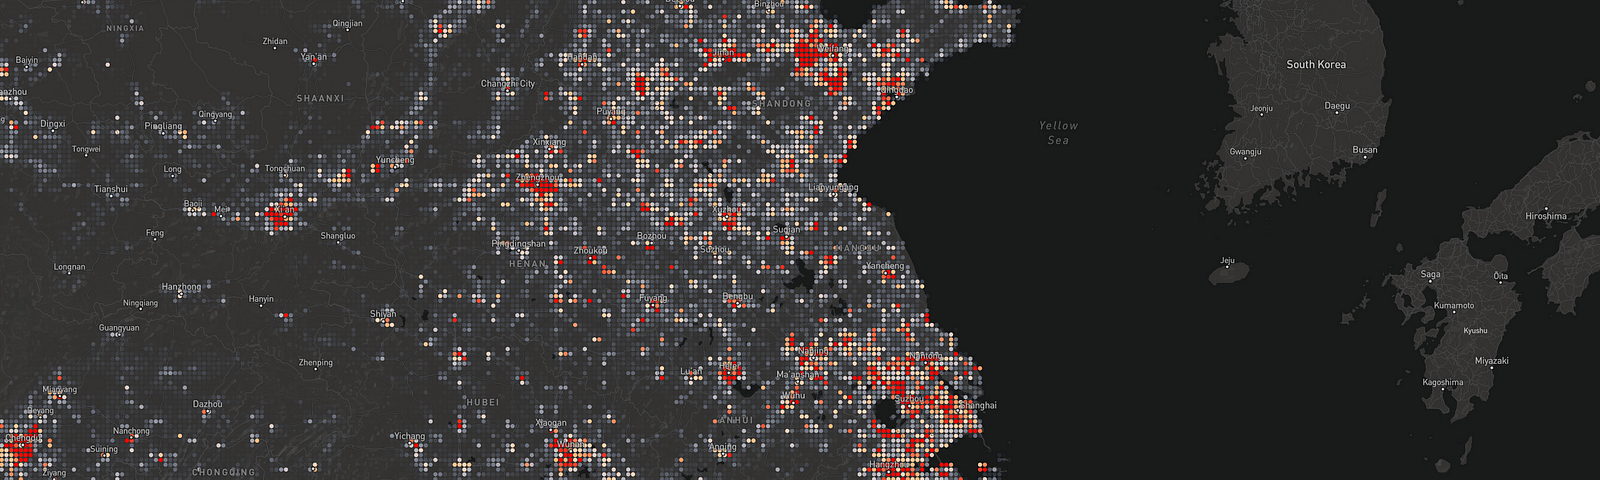 Aggregated building change heatmap over Eastern China